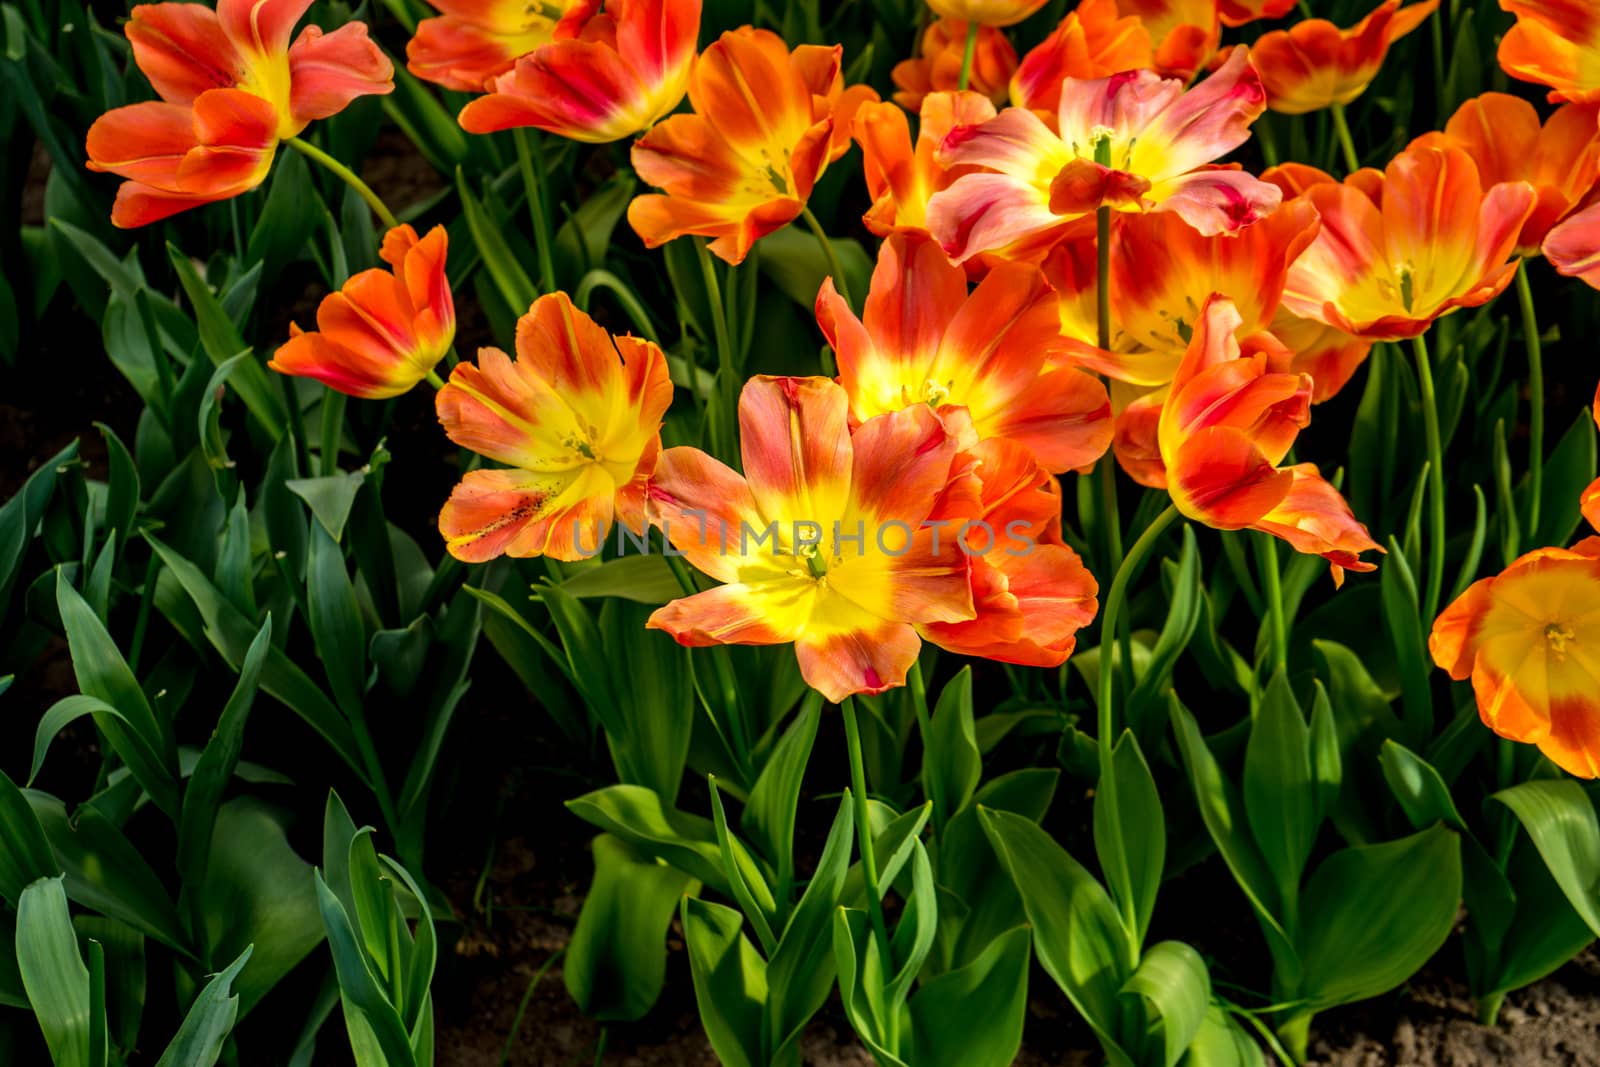 Red and Yellow tulip flowers in a garden in Lisse, Netherlands, Europe on a bright summer day